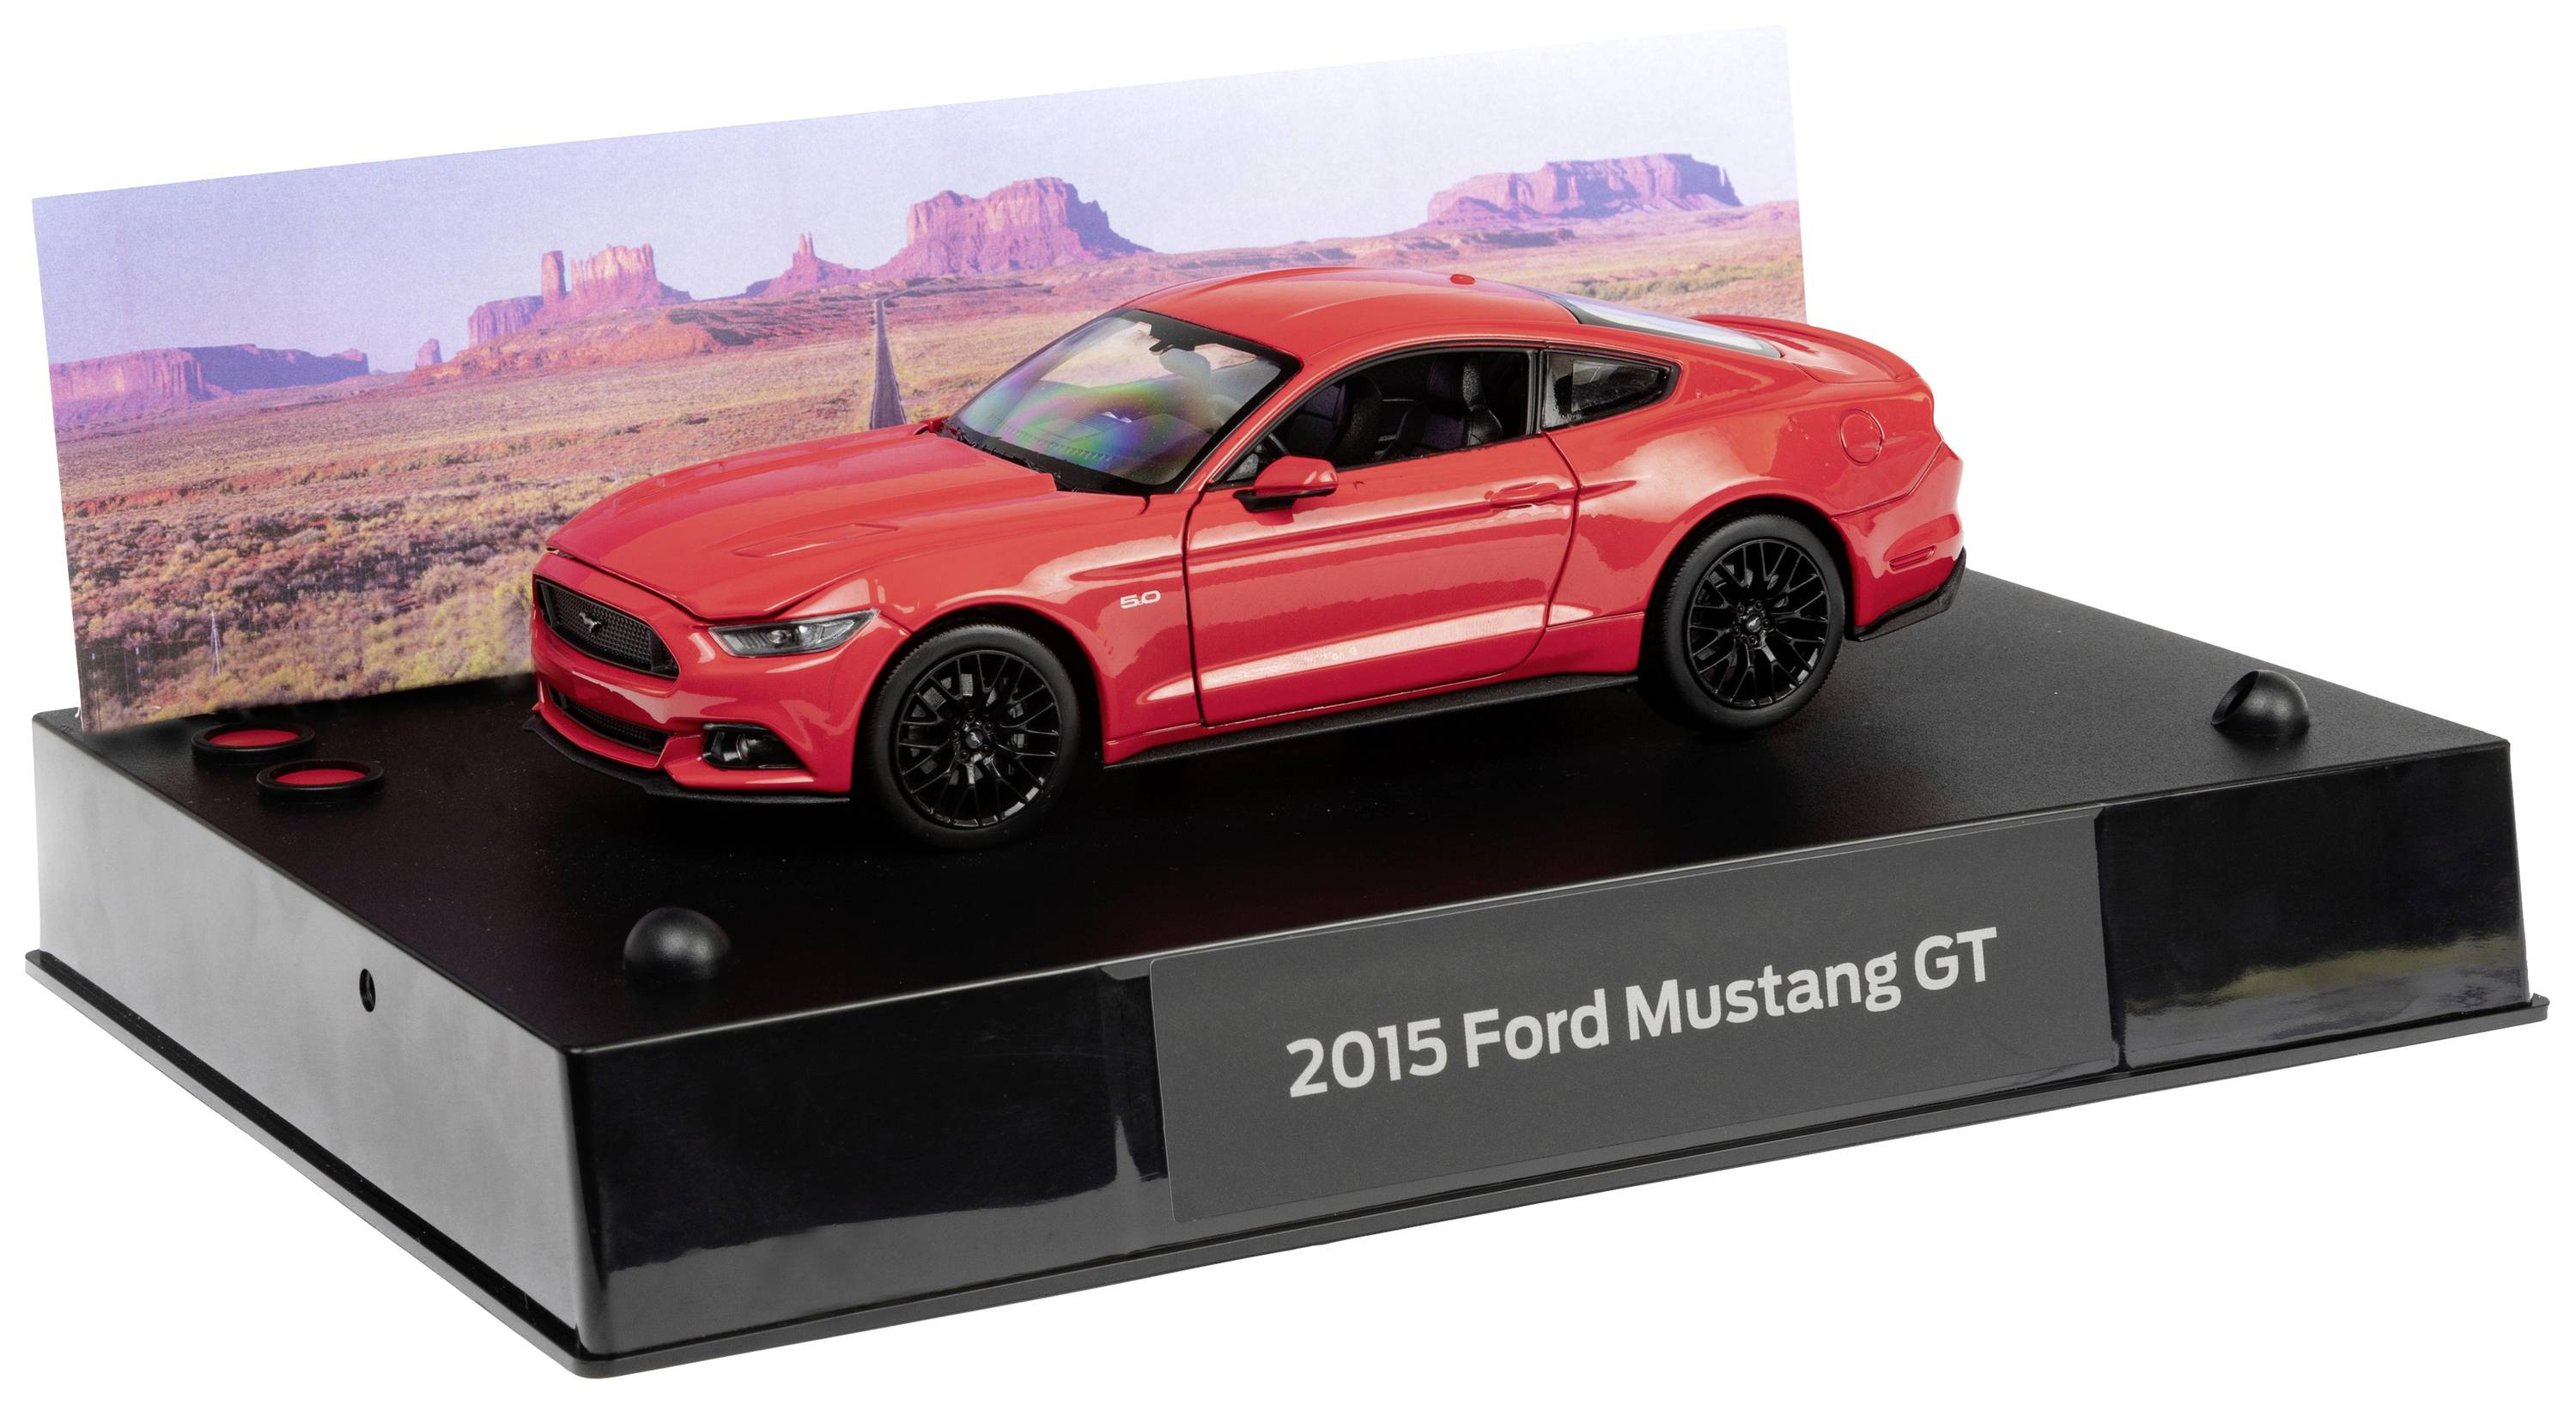 Franzis Verlag Ford Mustang Ford Mustang Assembly kits, Electronics